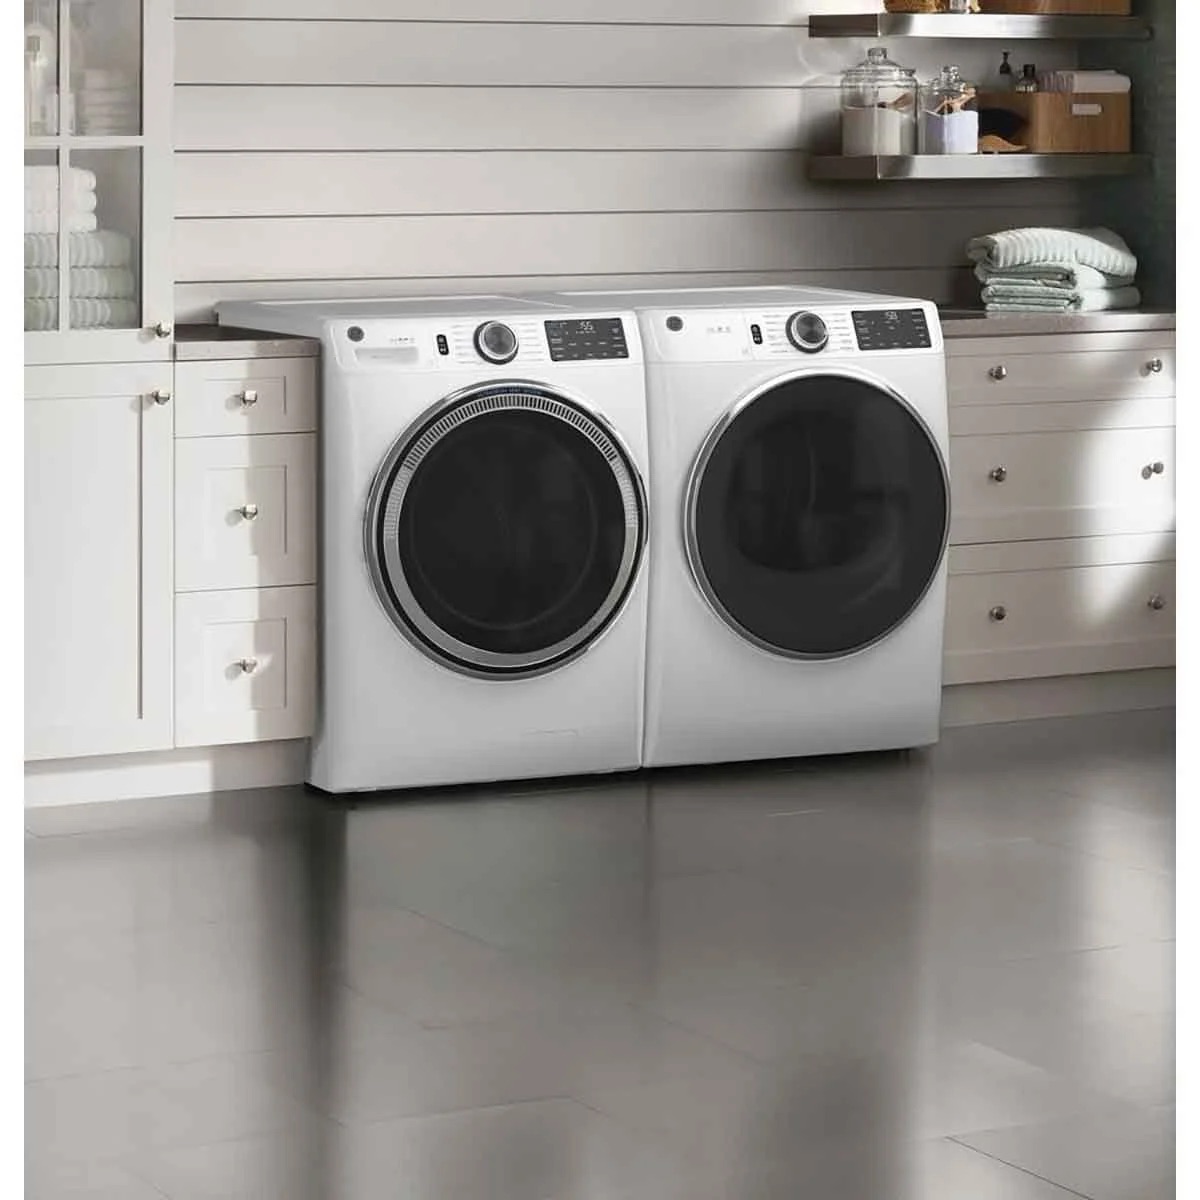 What To Look For In A Washer And Dryer